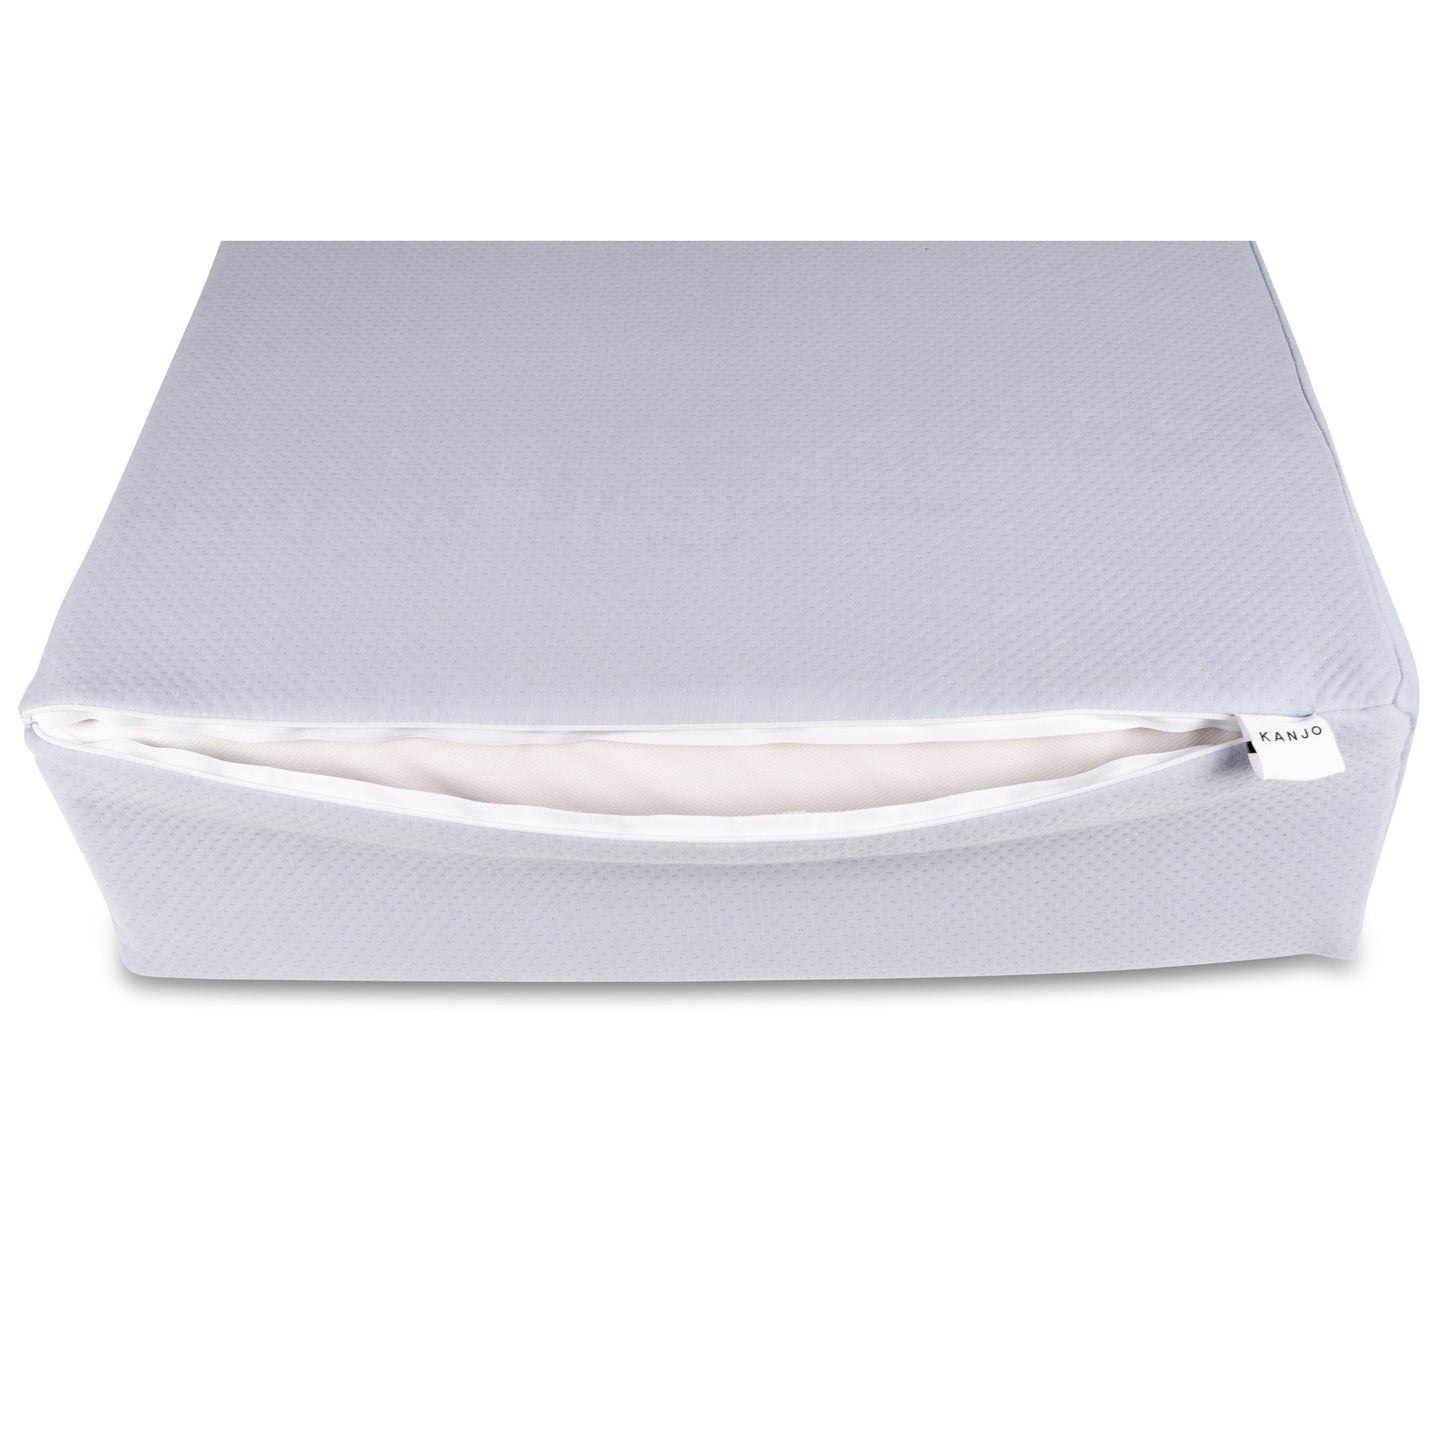 Kanjo Acid Reflux and Pain Relief Wedge Pillow